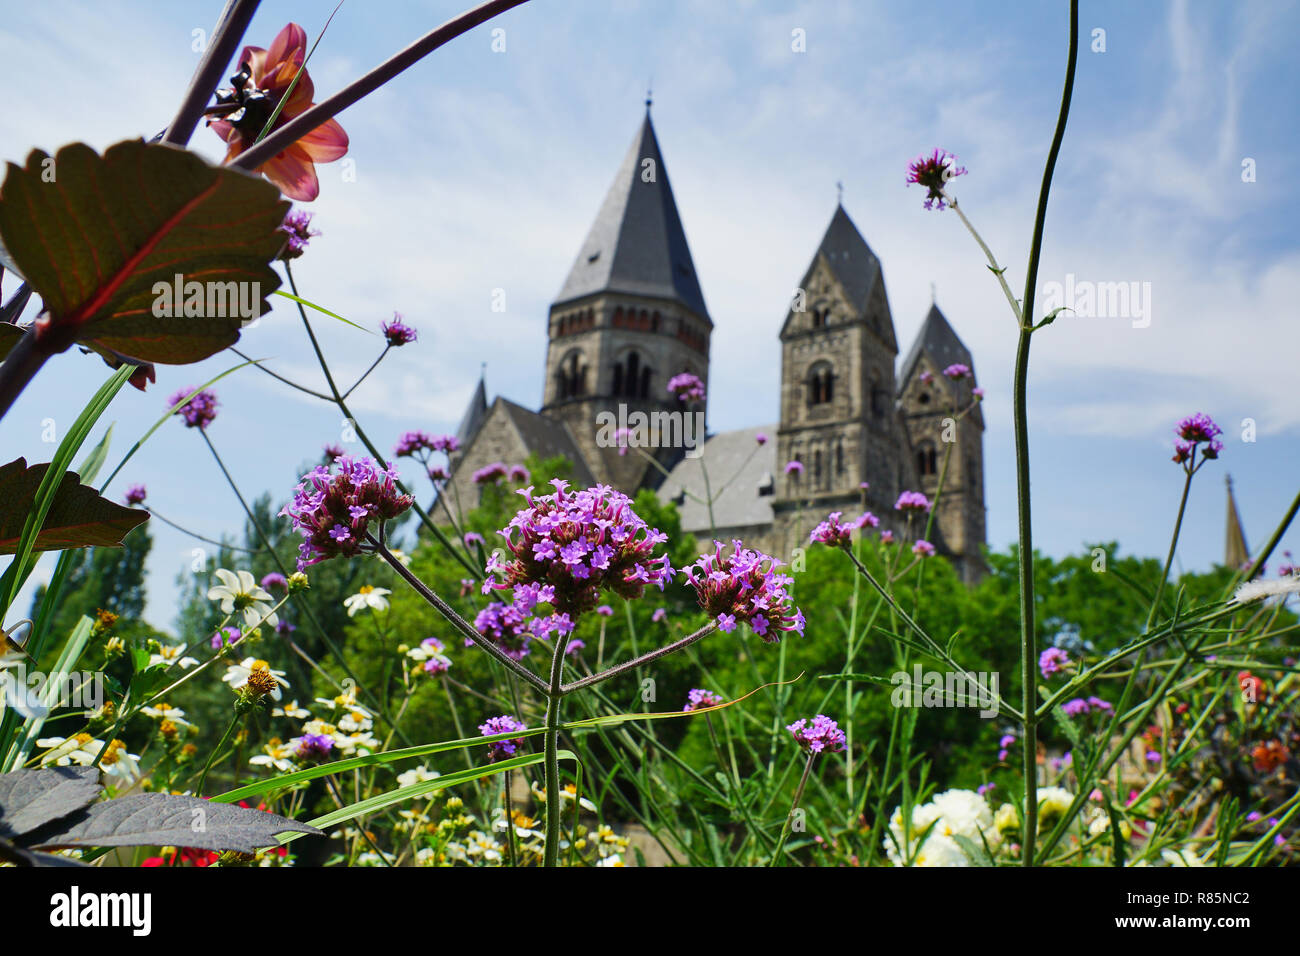 Church Eglise du Temple Neuf with flowers in the foreground, Metz, France Stock Photo